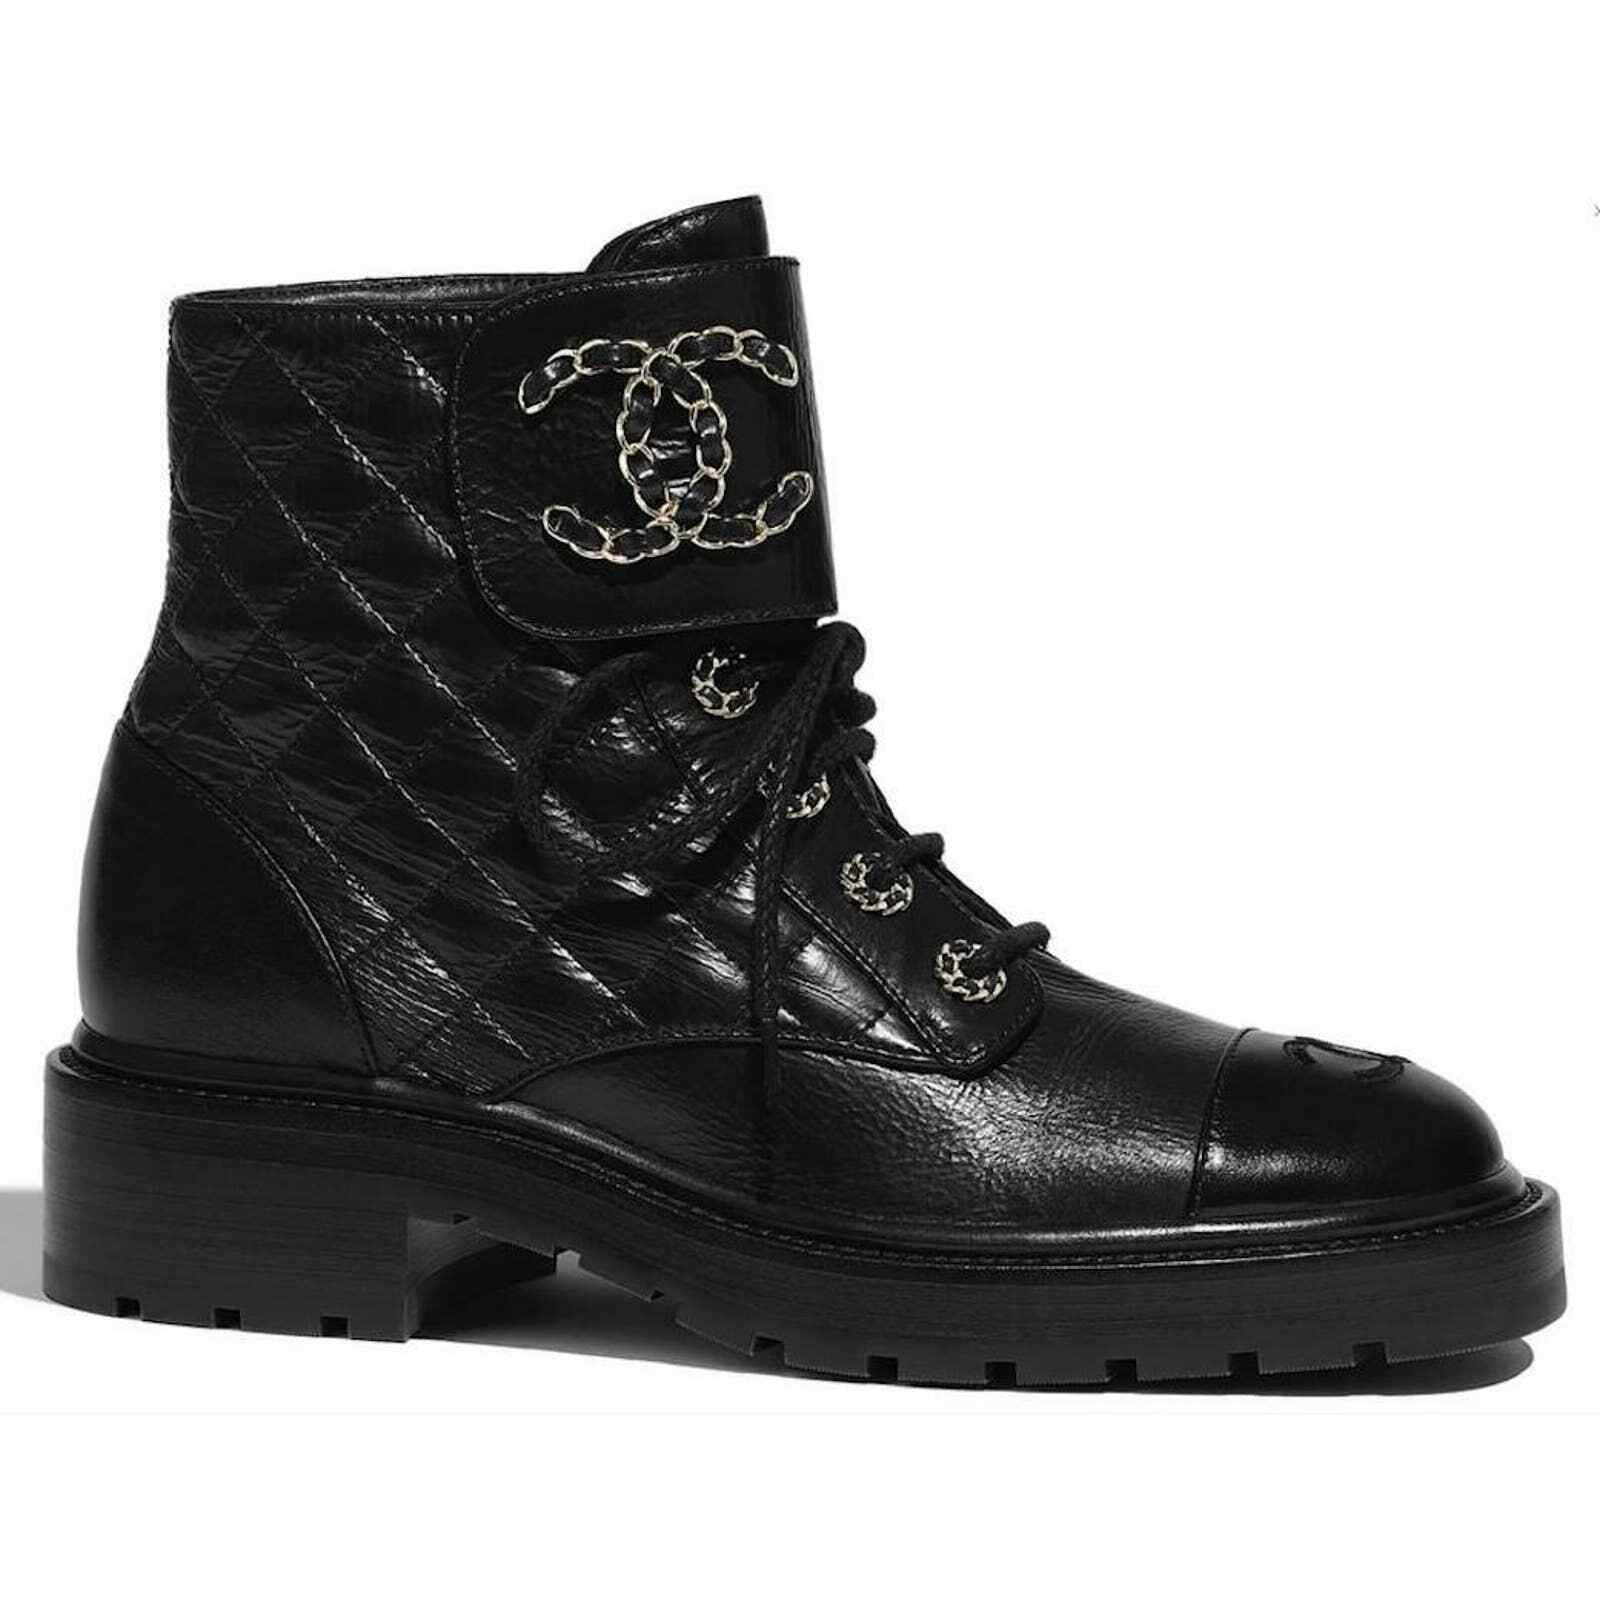 Kids' Combat Boots for Girls